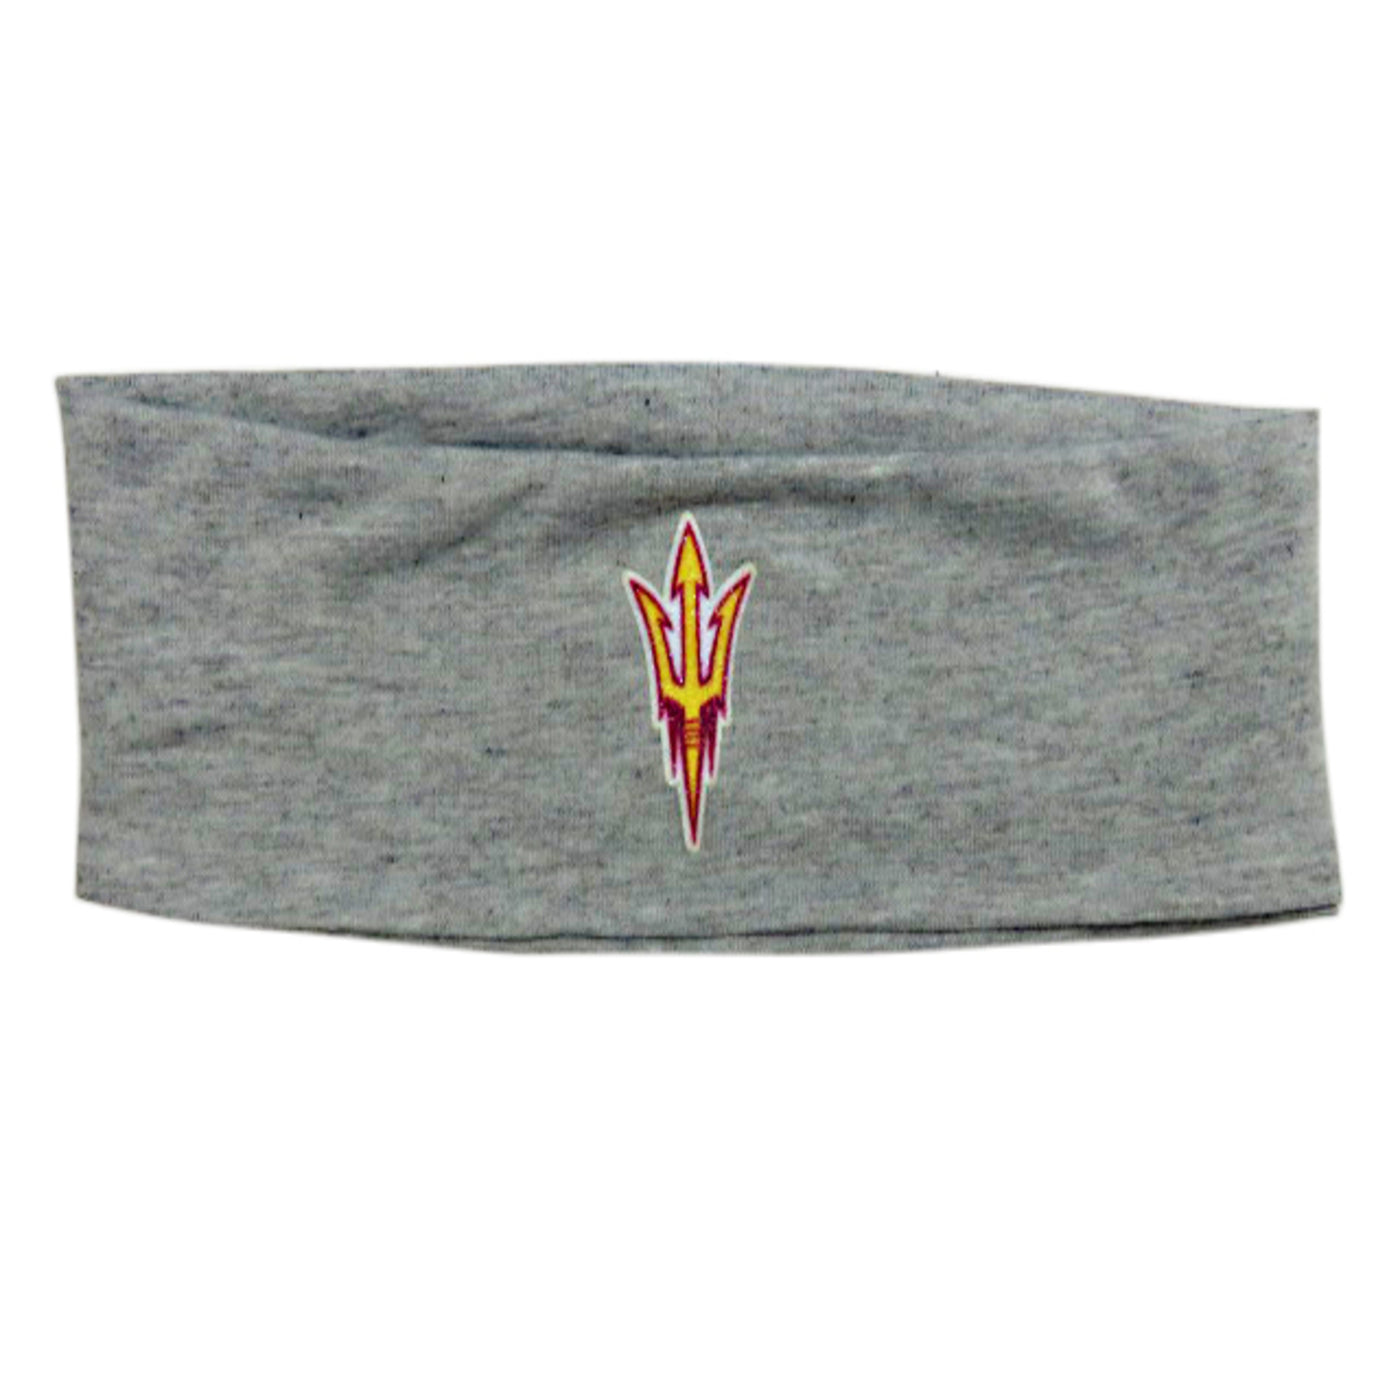 ASU grey headband with gold pitchfork outlined in maroon.